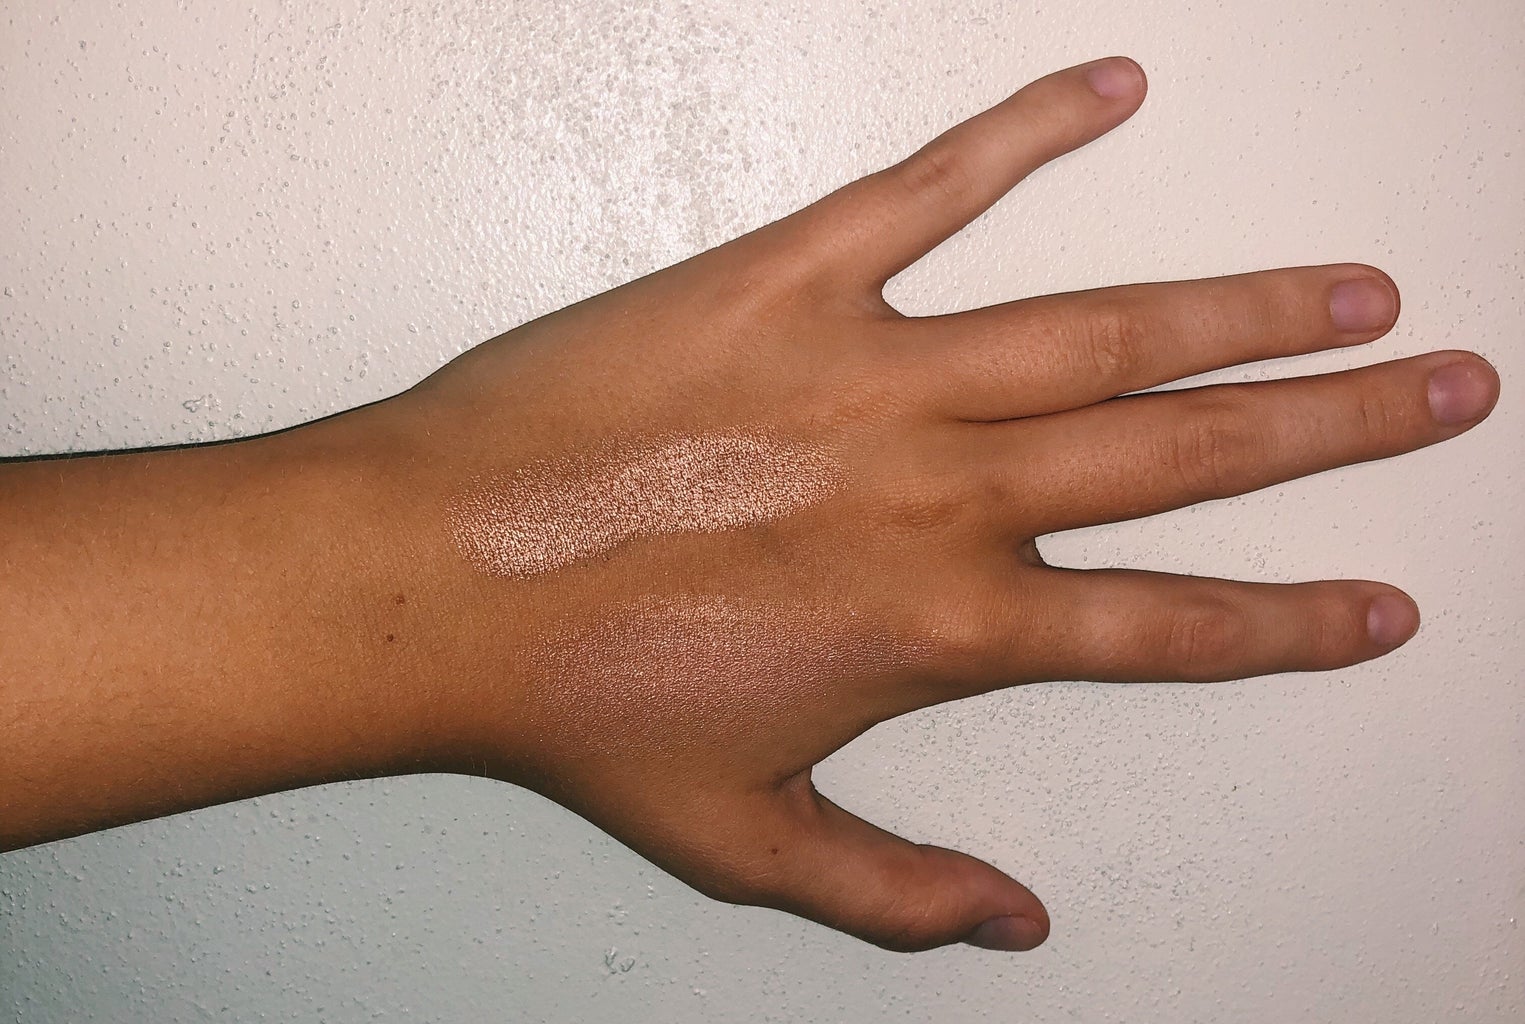 swatches of beauty products